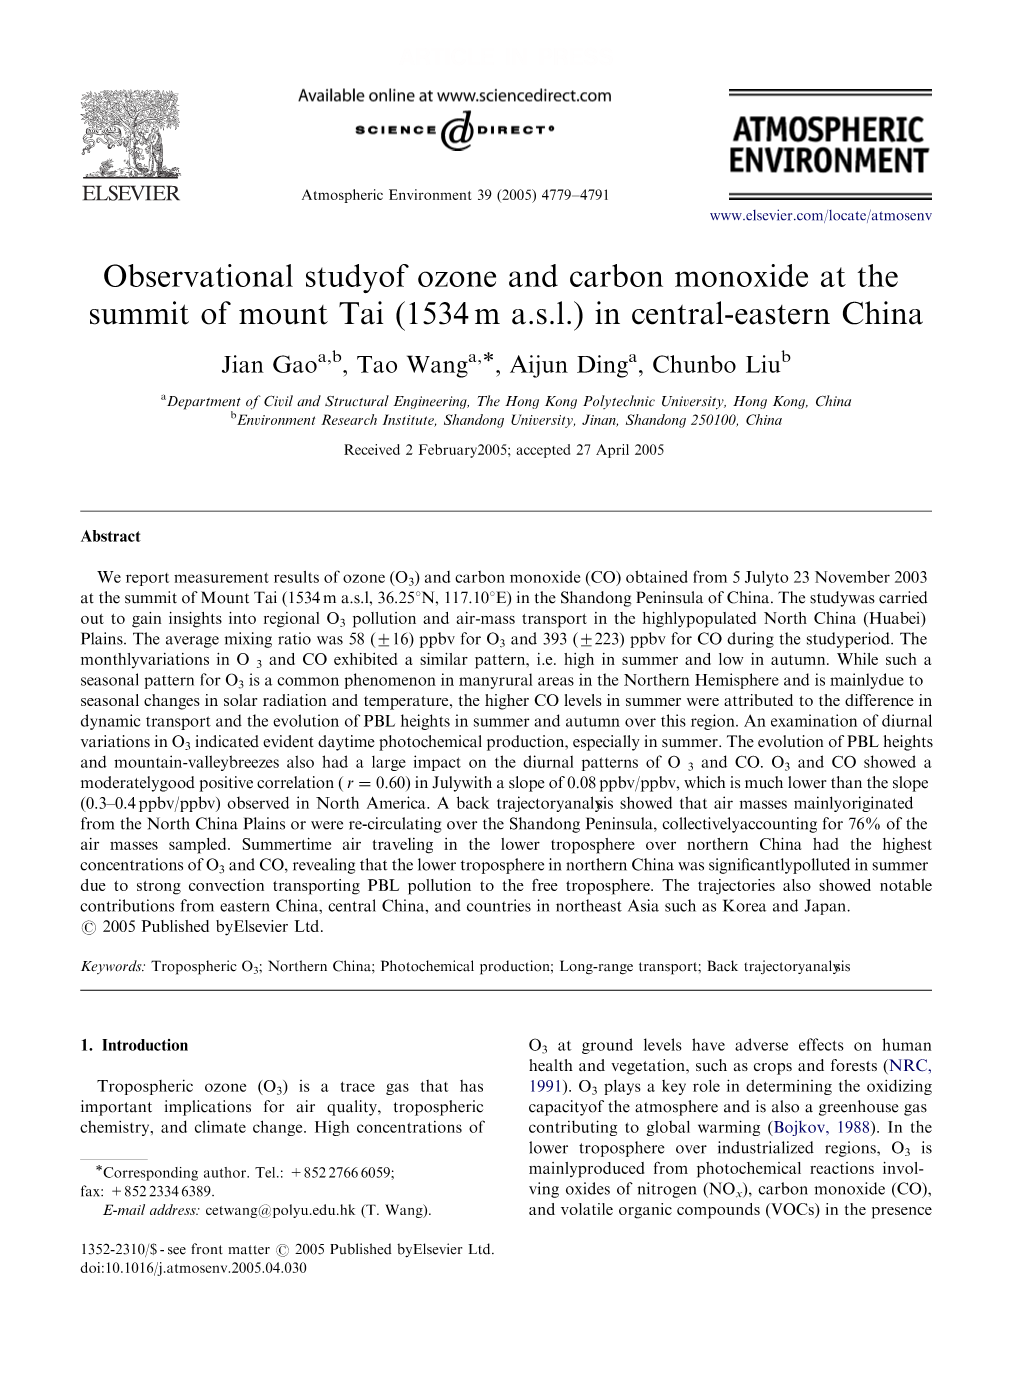 Observational Study of Ozone and Carbon Monoxide at the Summit Of